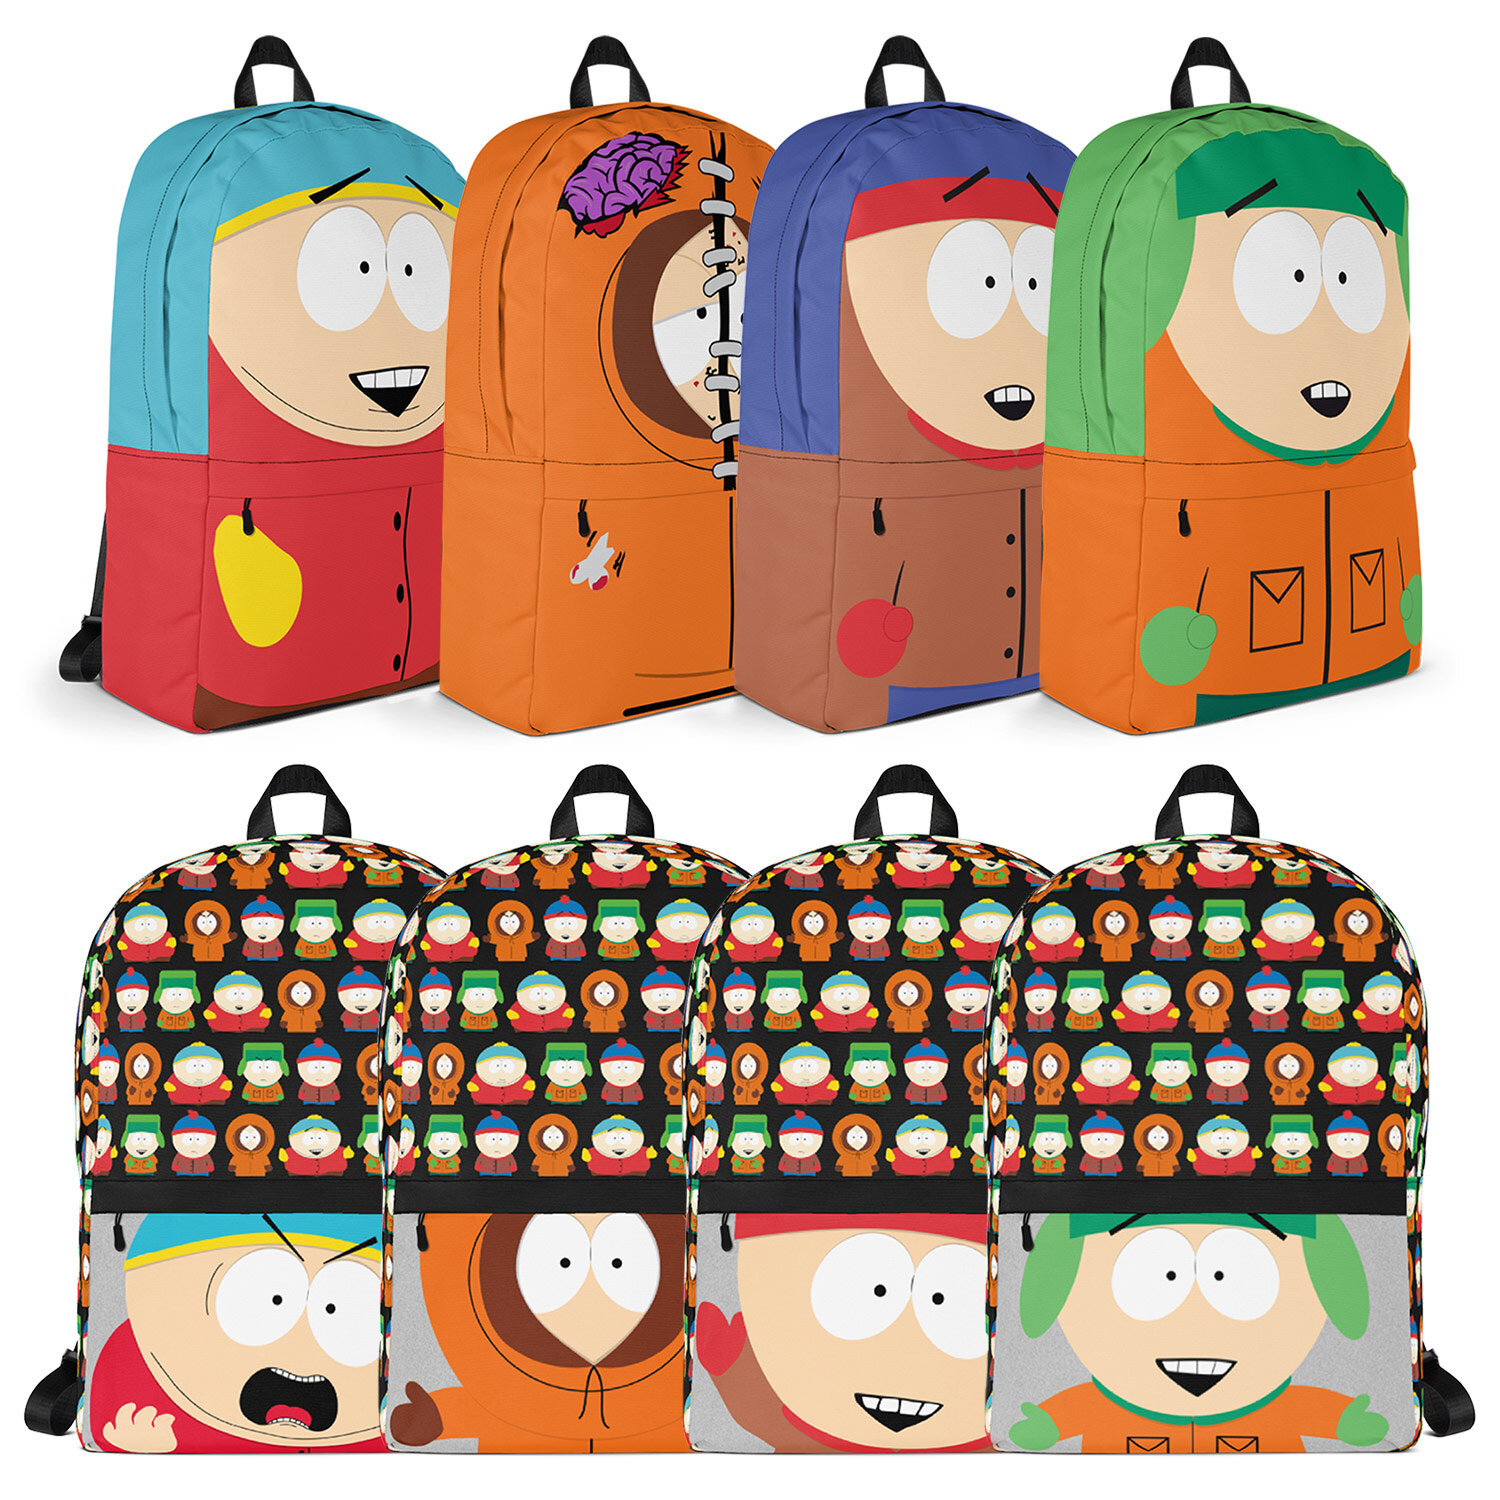 SOUTH PARK COLLECTIONS — BRIANANDREWBYRD